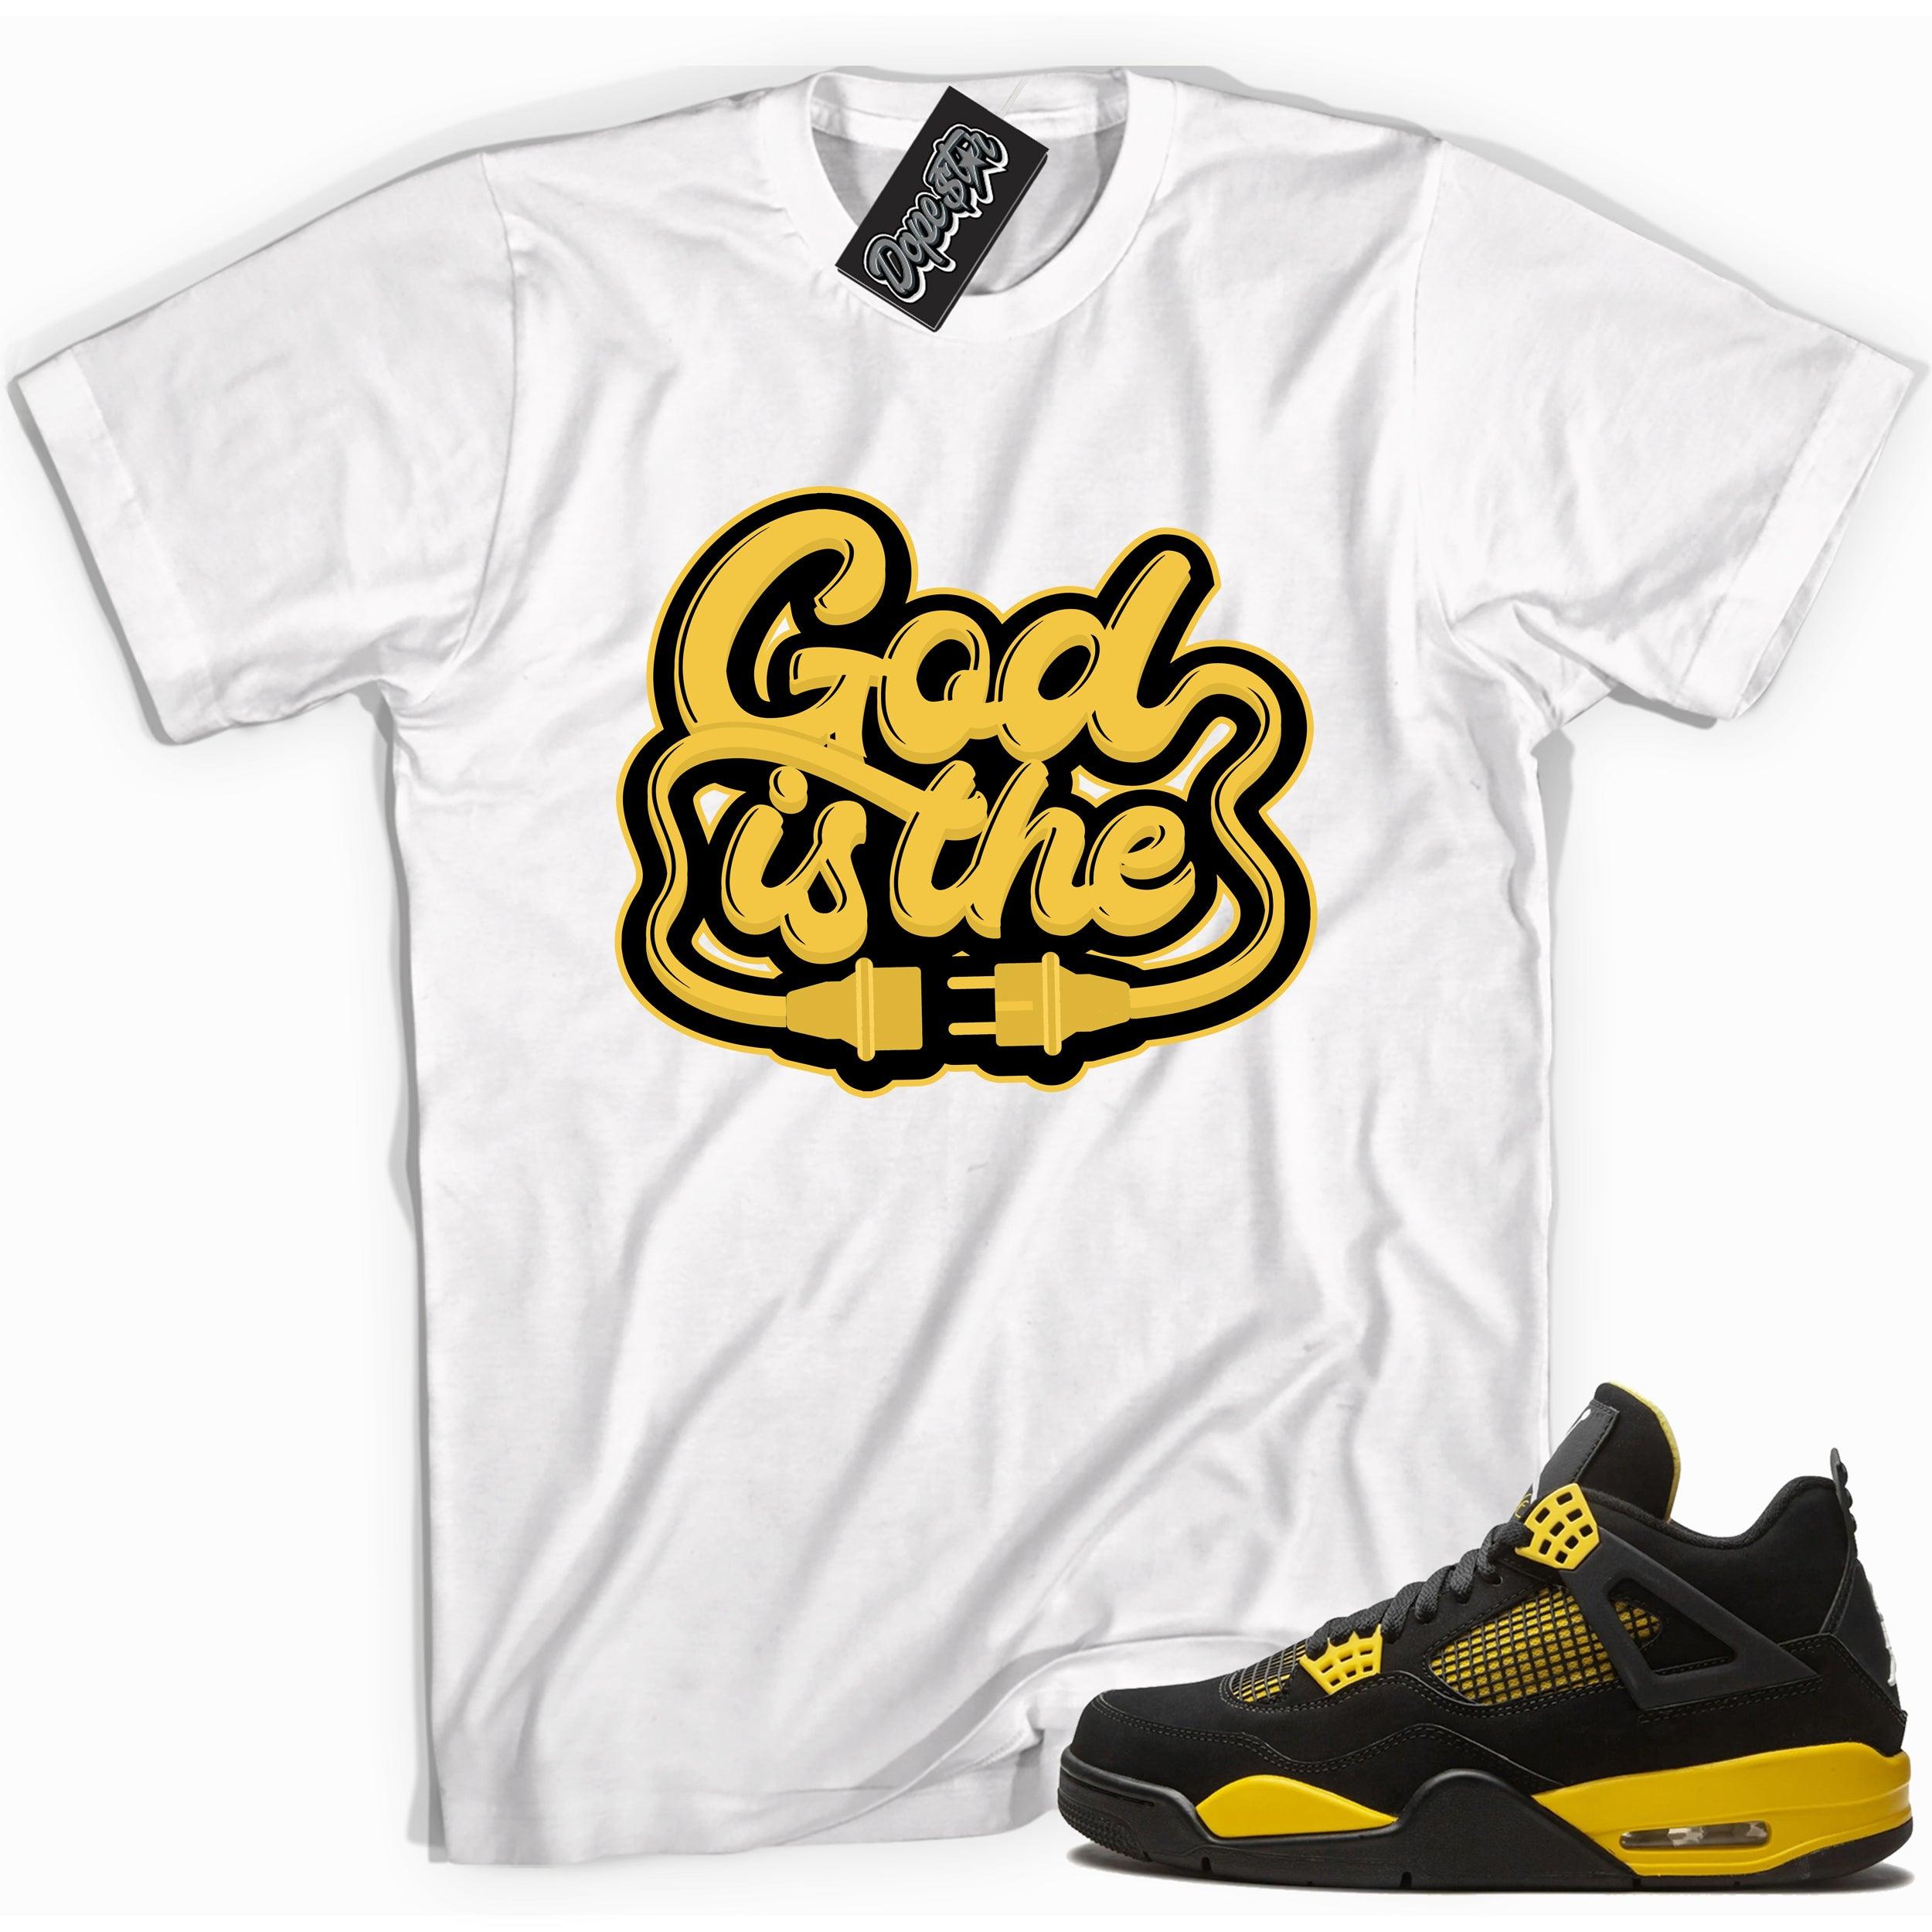 Cool white graphic tee with 'god is the plug' print, that perfectly matches Air Jordan 4 Thunder sneakers